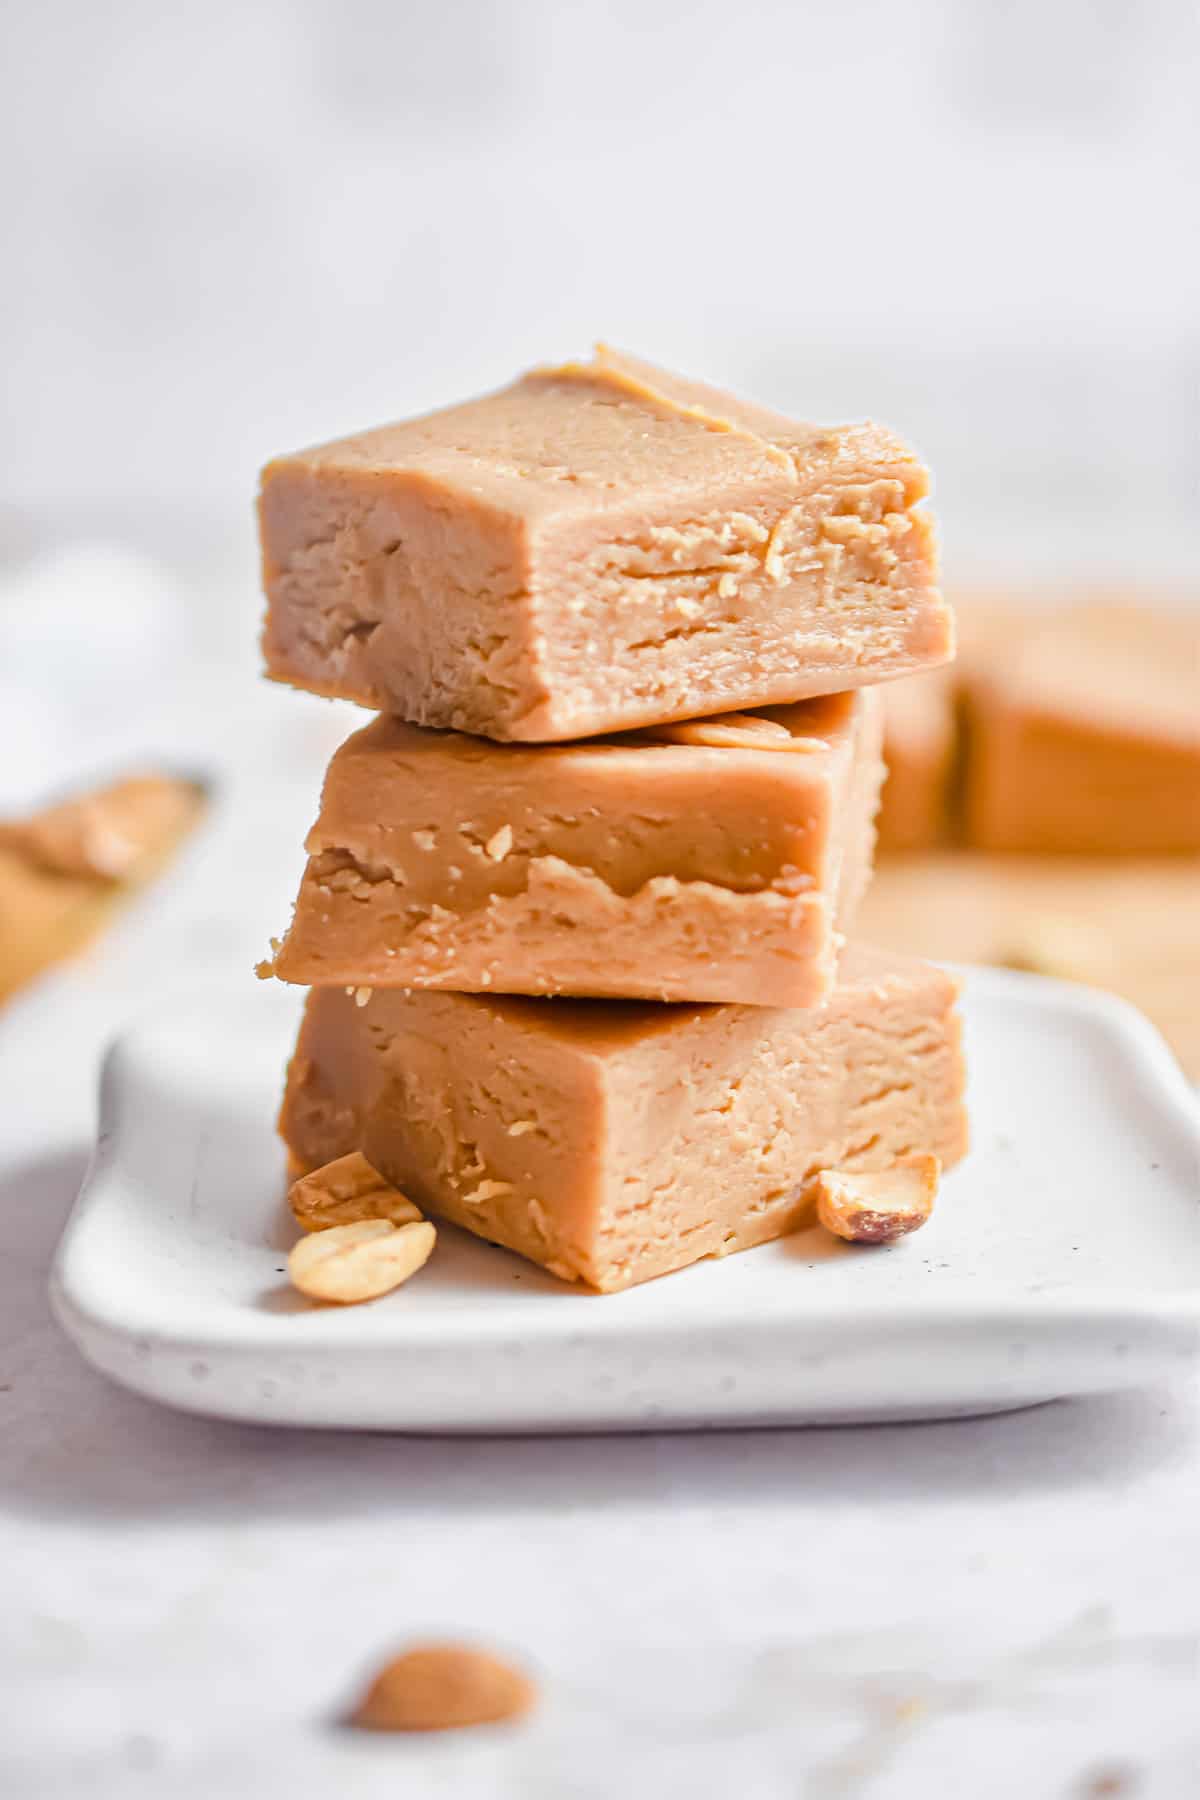 <p>An easy no bake dessert, this 2 Ingredient Peanut Butter Fudge is made with two simple ingredients and ready in no time!</p> <p><strong>Go to the recipe:</strong> <strong><a href="https://lynnswayoflife.com/2-ingredient-peanut-butter-fudge/">2 Ingredient Peanut Butter Fudge</a></strong></p>